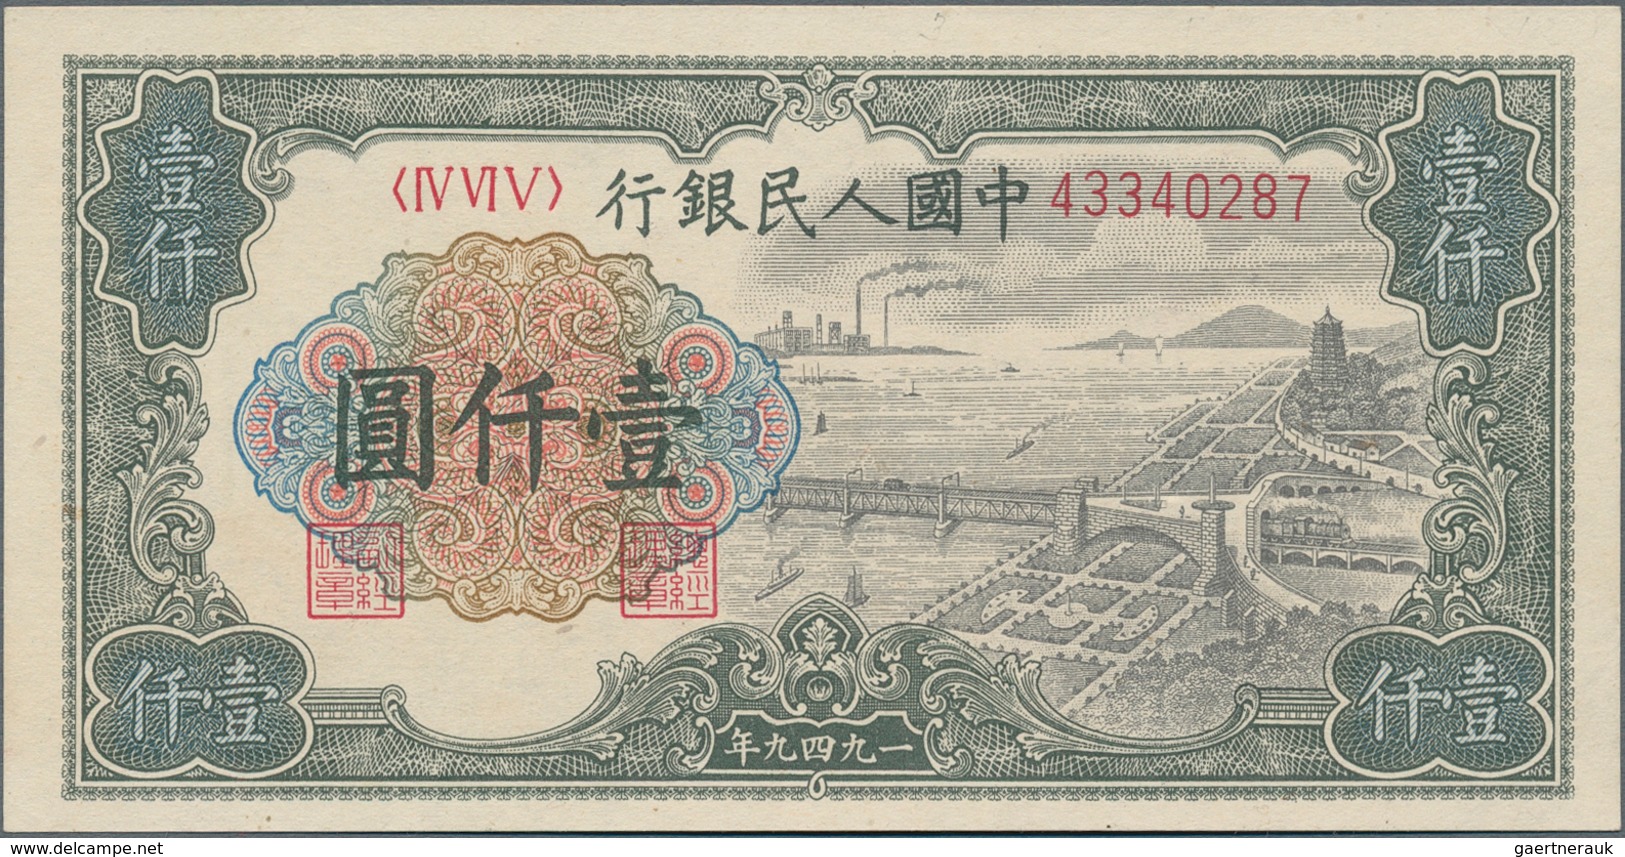 China: Peoples Republic Of China Series 1949 1000 Yuan, P.847 In Perfect UNC Condition. Very Rare! - China